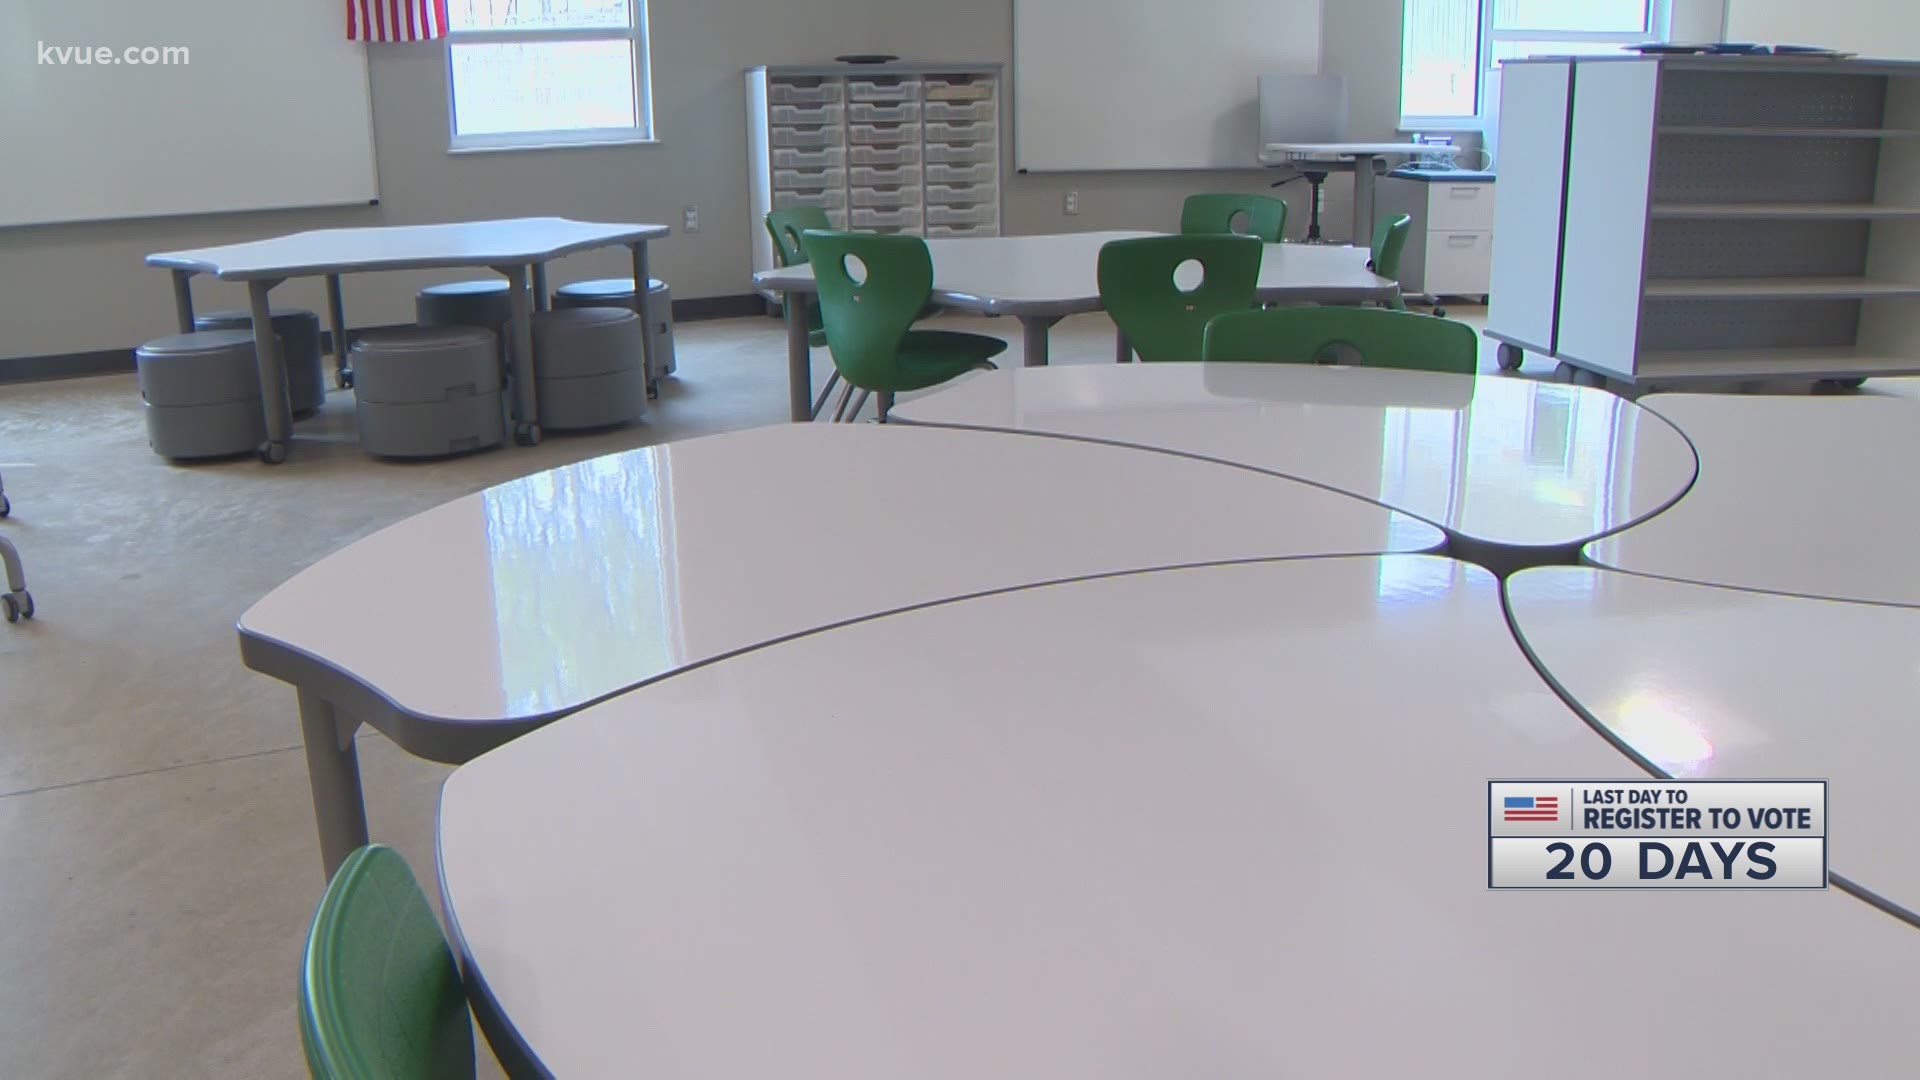 In just a few weeks, Austin ISD students will return to classrooms for in-person learning. On Monday night, district leaders met to talk about how that will look.